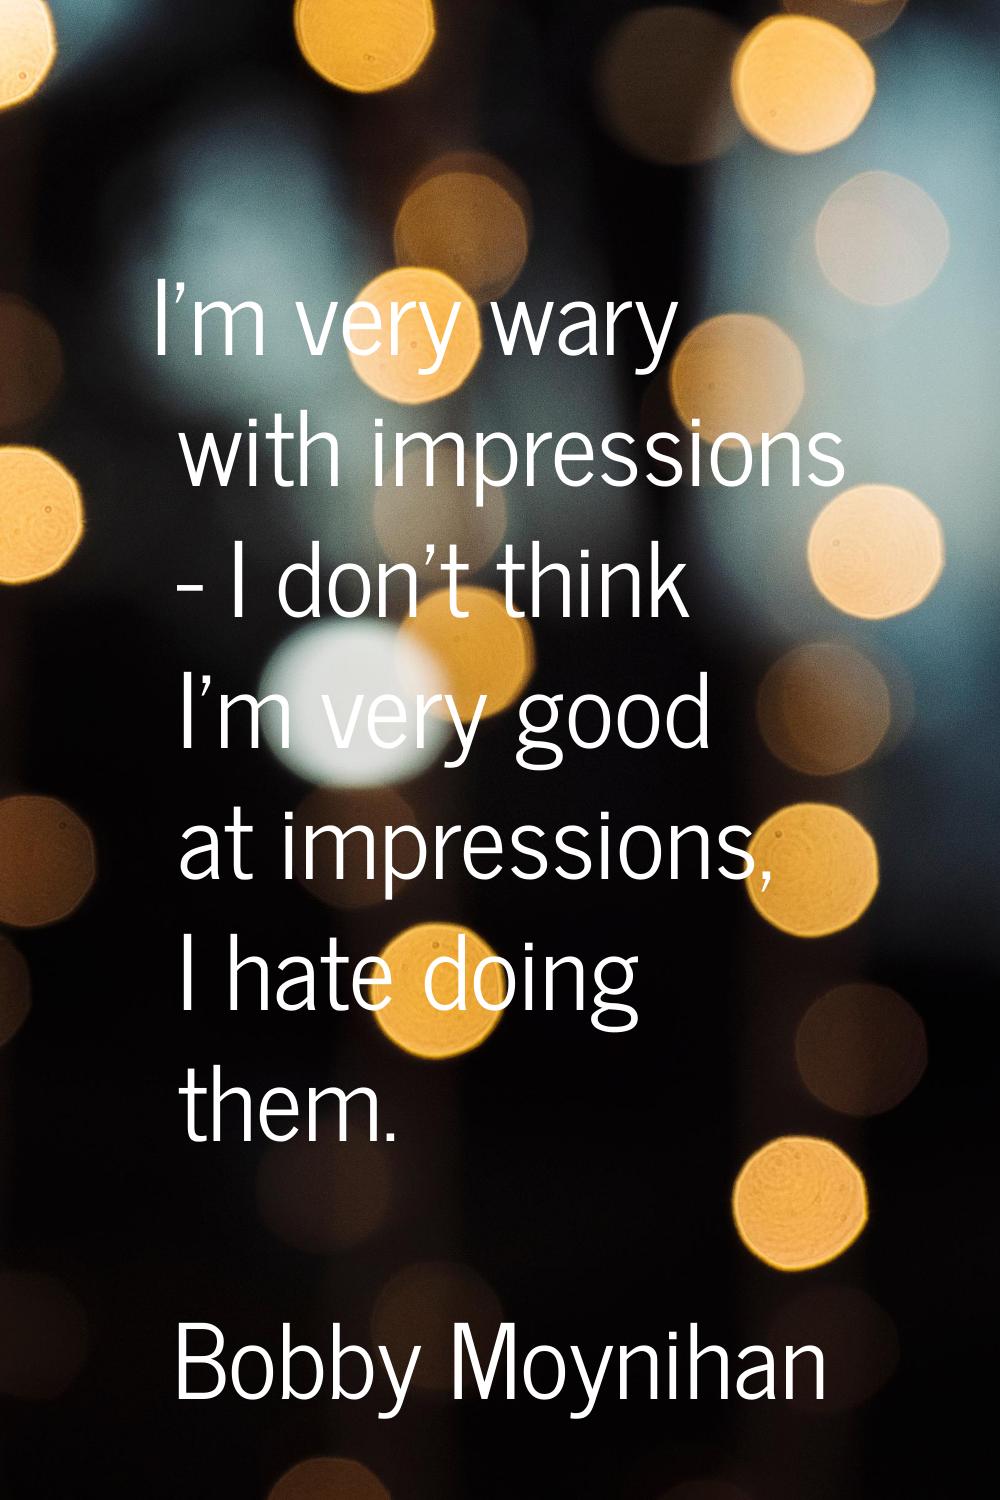 I'm very wary with impressions - I don't think I'm very good at impressions, I hate doing them.